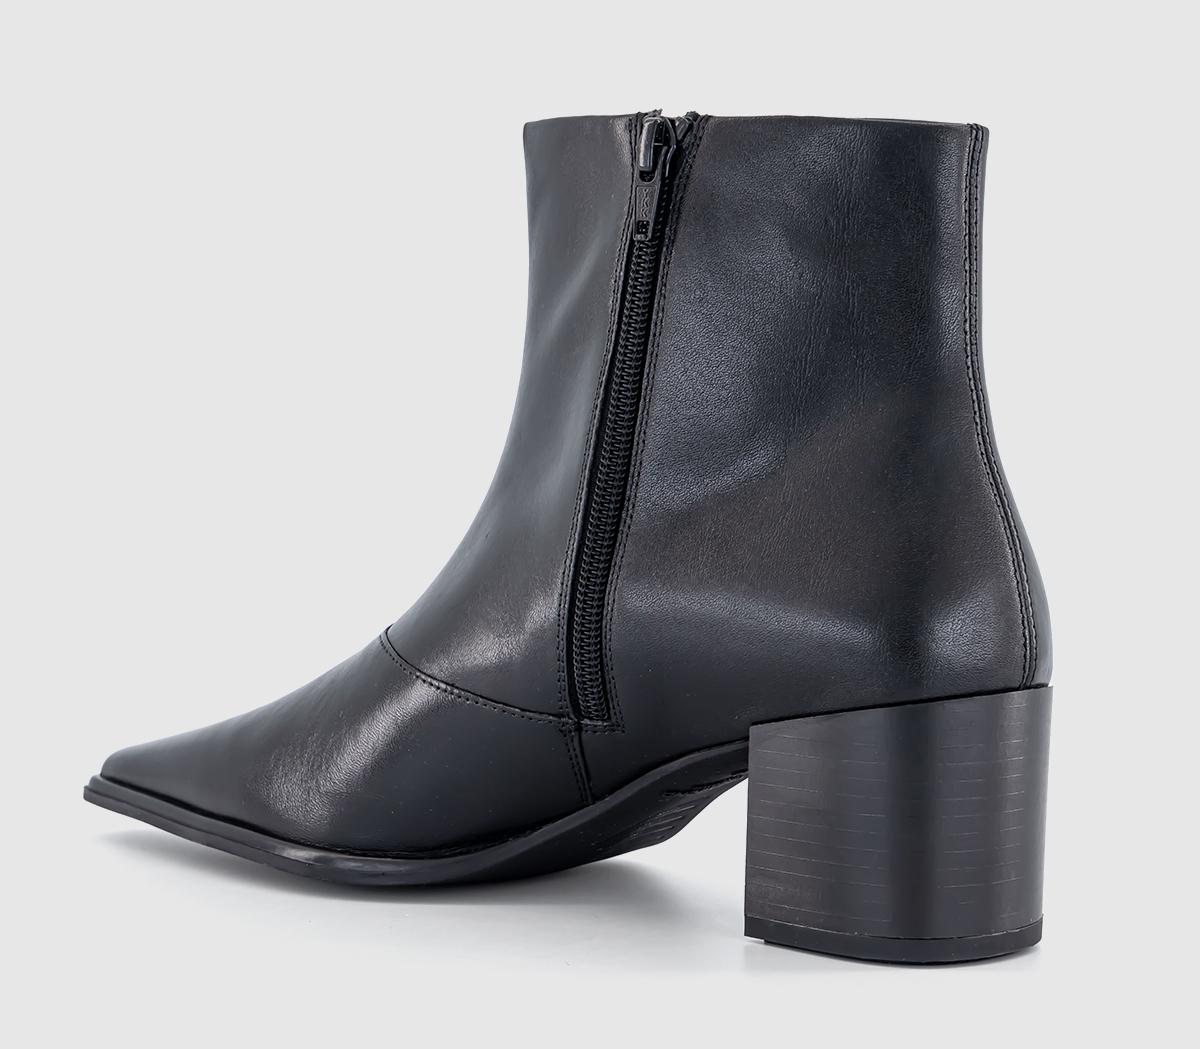 Vagabond Shoemakers Giselle Ankle Boot Black - Women's Ankle Boots